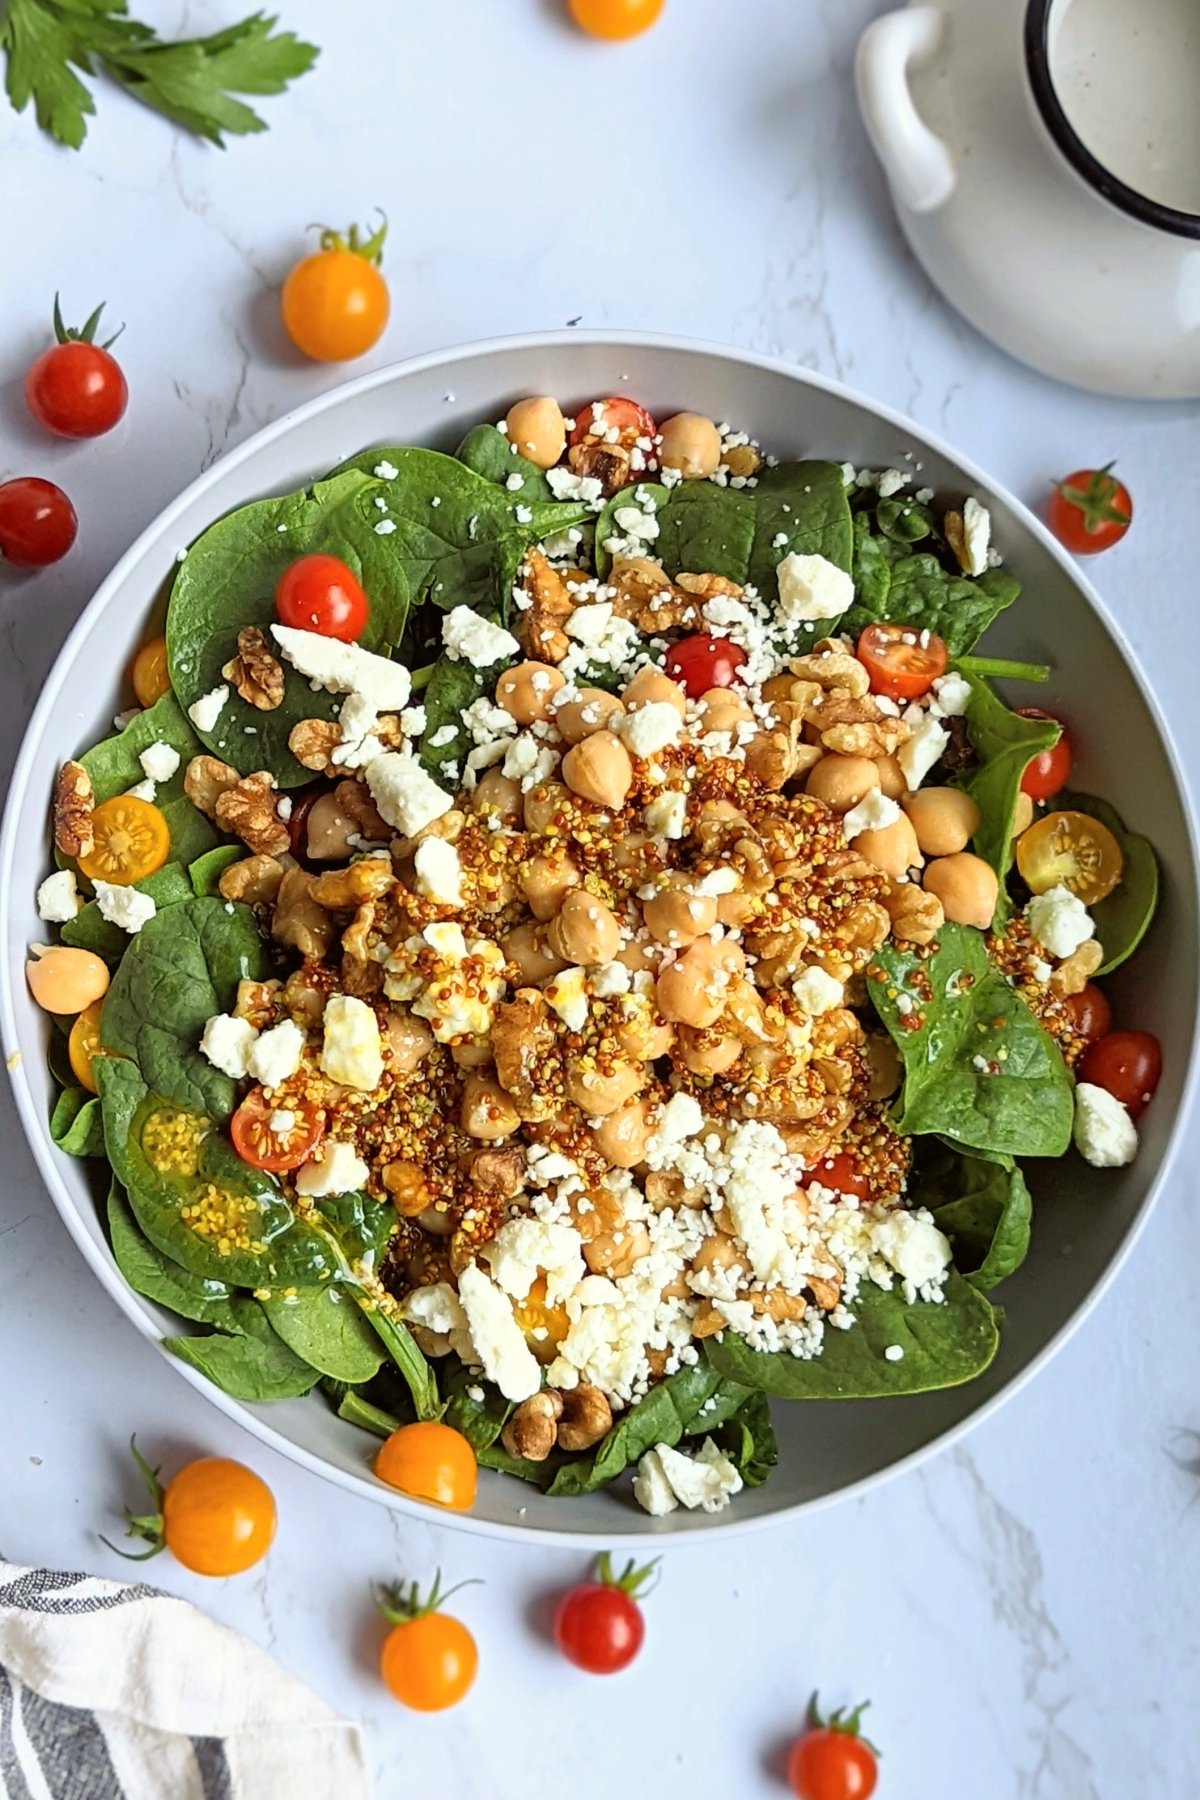 spinach salad with chickpeas recipe healthy high protein vegetarian salads without meat recipe summer or winter salads with spinach